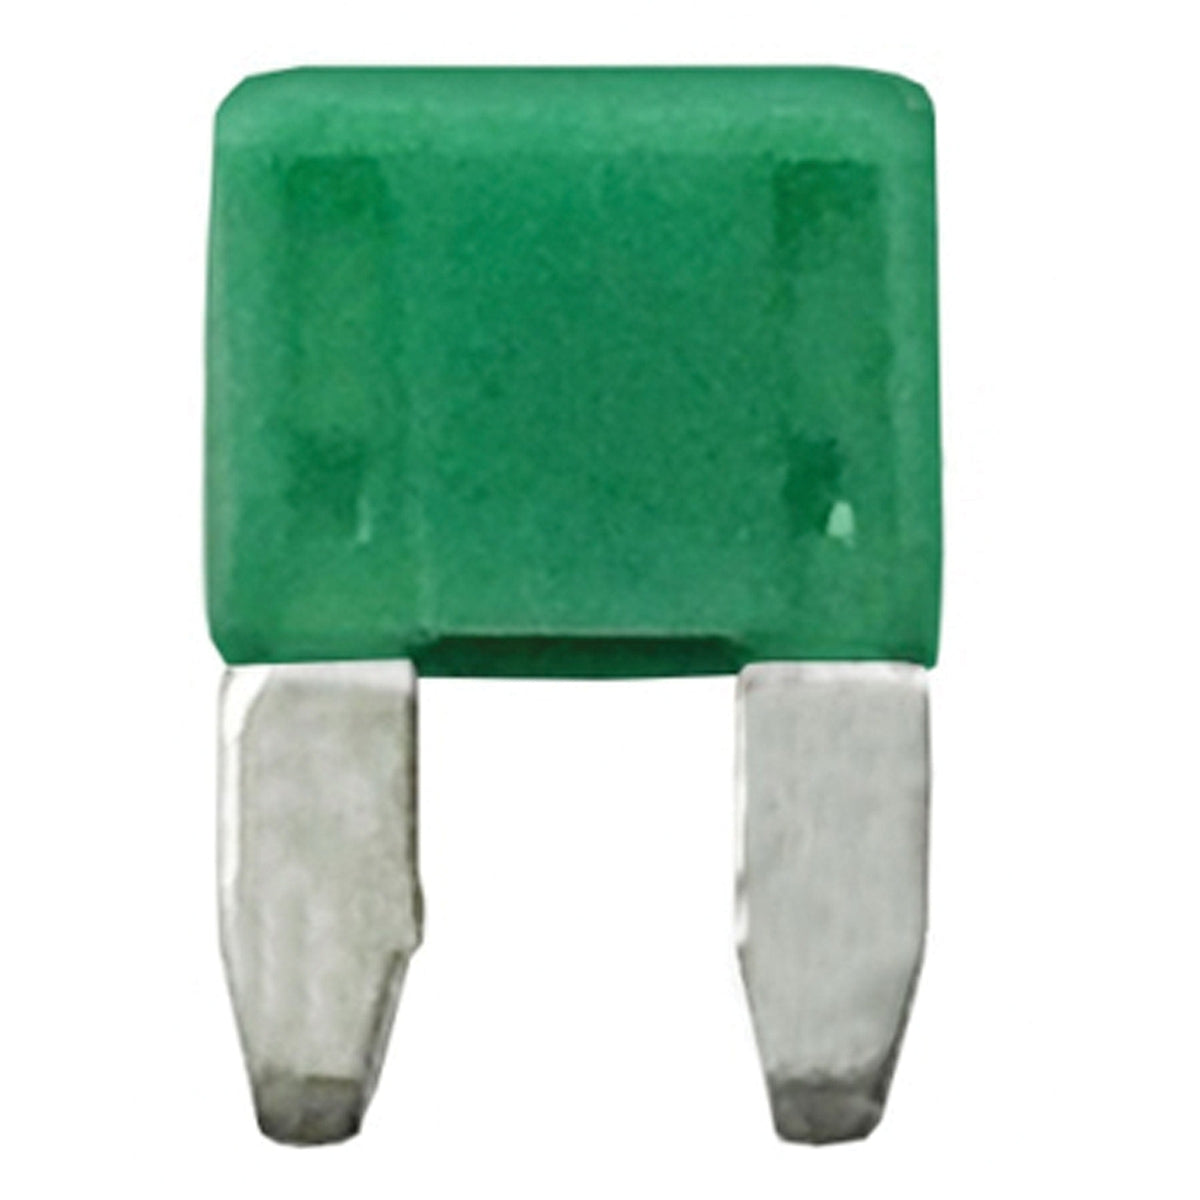 Wirthco Qualifies for Free Shipping Wirthco Fuse ATM Mini 30a Green 5-pk #24130